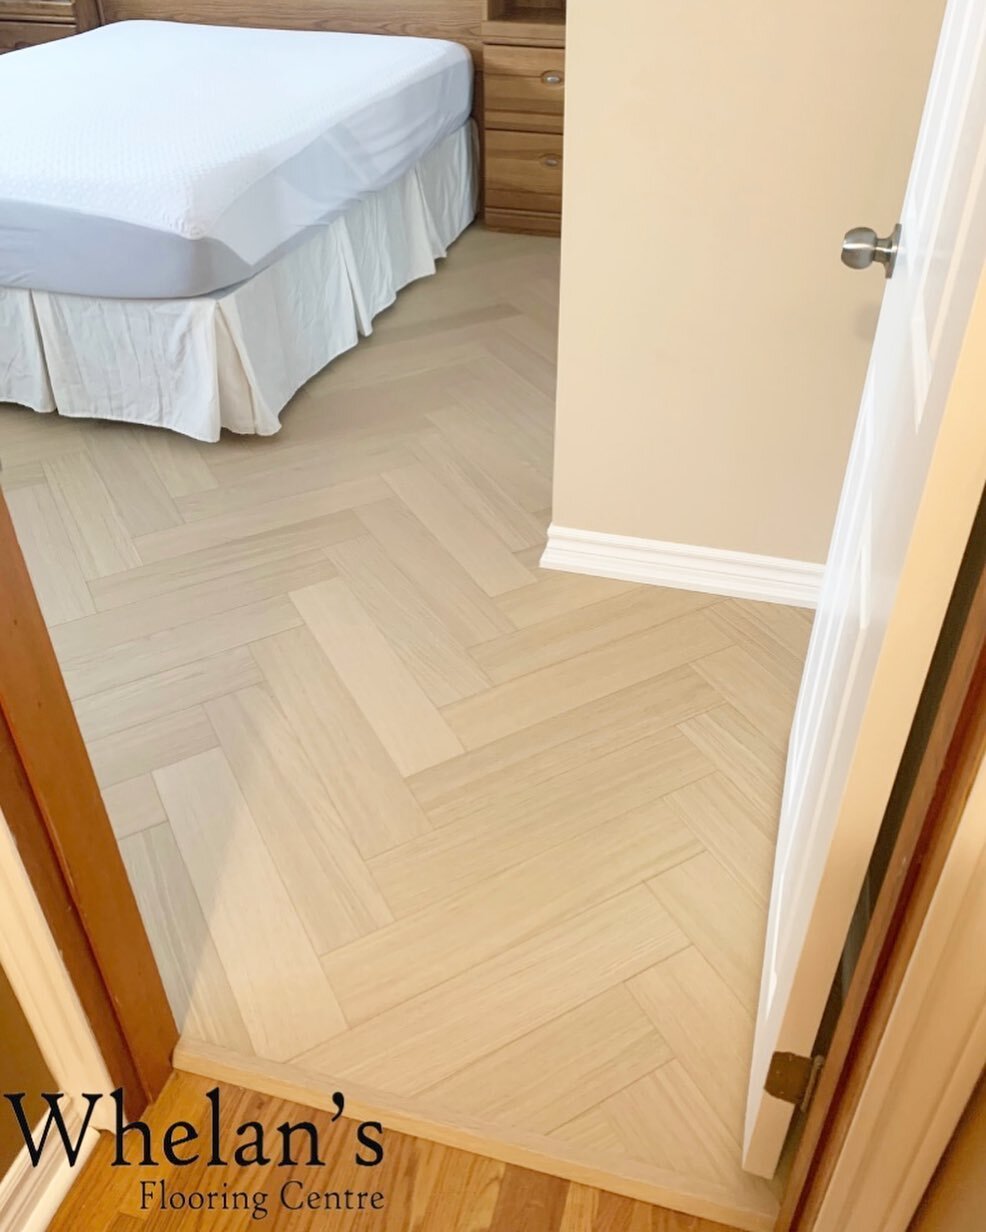 Nothing feels more welcoming than this beautiful herringbone pattern into our clients primary bedroom 😍Our clients decided to do a click engineered hardwood in this bedroom to help elevate the space! 
.
.
.
Material supplied by @whelansflooringcentr